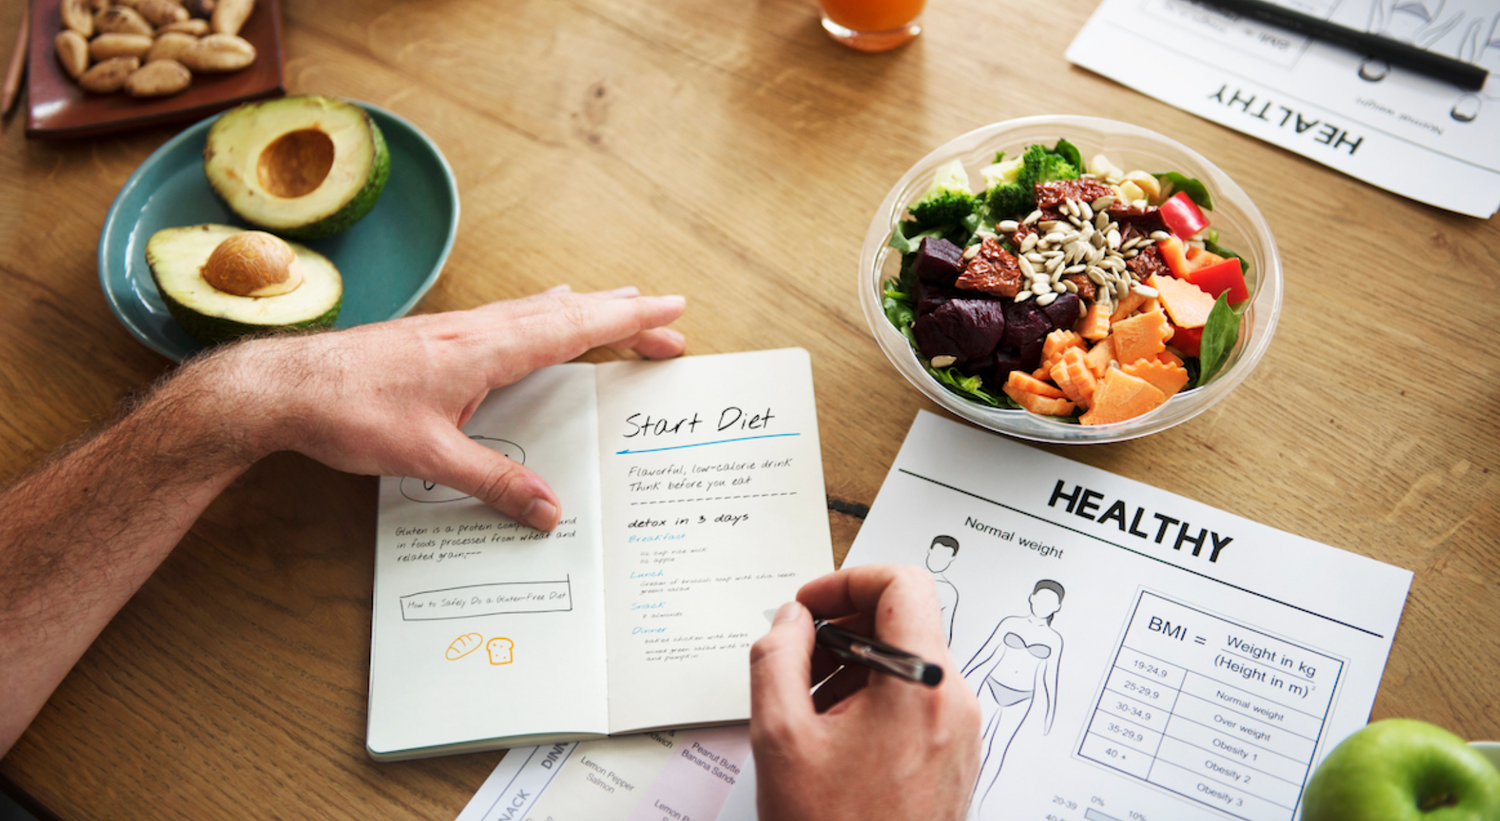 Start living the healthy life you deserve with Noom